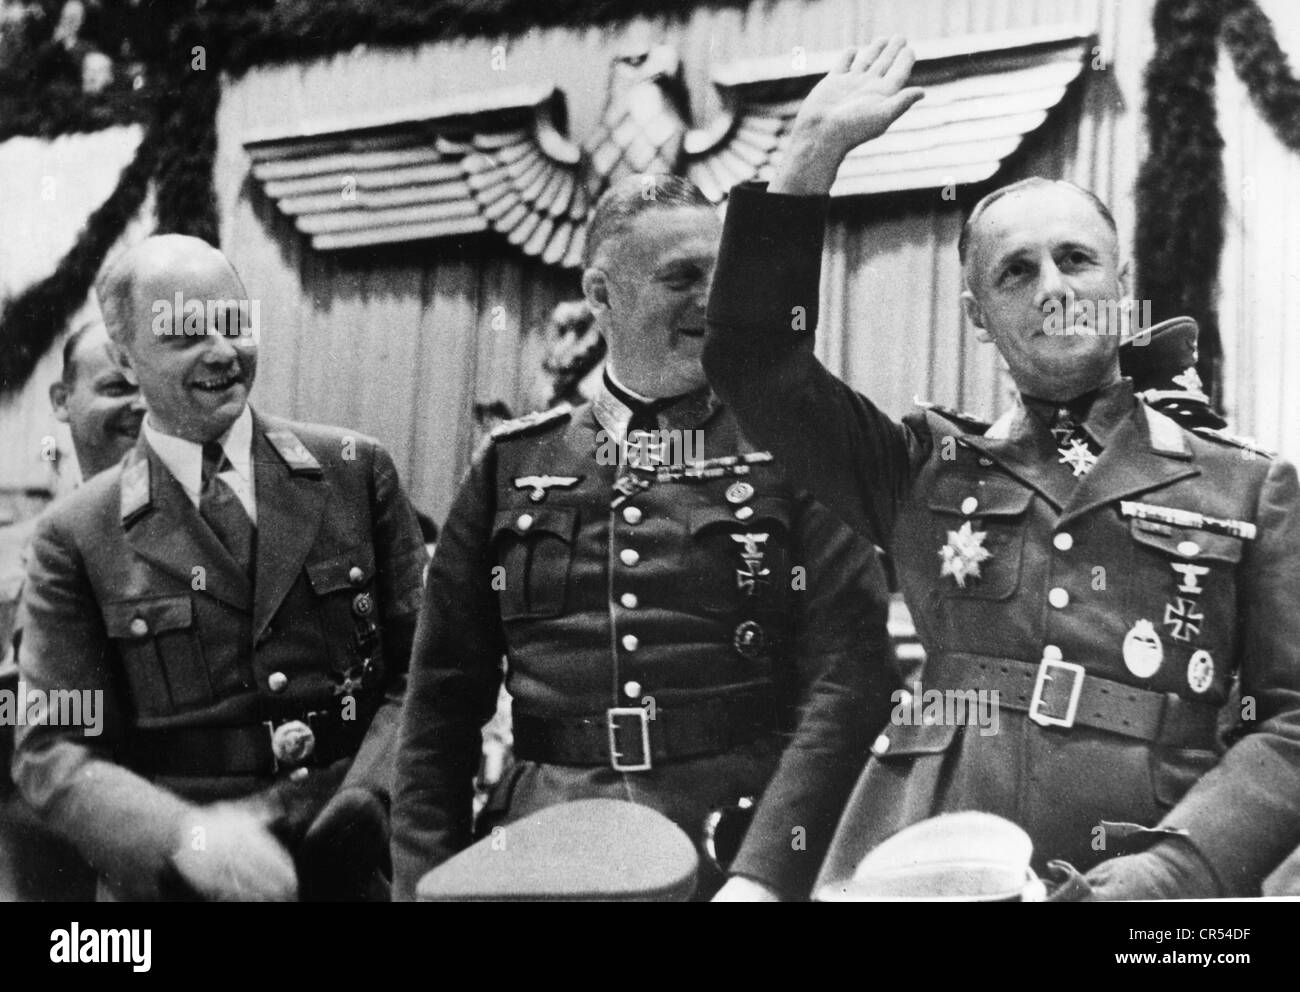 Rommel, Erwin, 15.11.1891 - 14.10.1944, German general, half length, with Artur Görlitzer, Field Marshal Wilhelm Keitel, as guest on the VIP stand shortly before a speech given by Hitler, Sportpalast, Berlin, 30.9.1942, Stock Photo